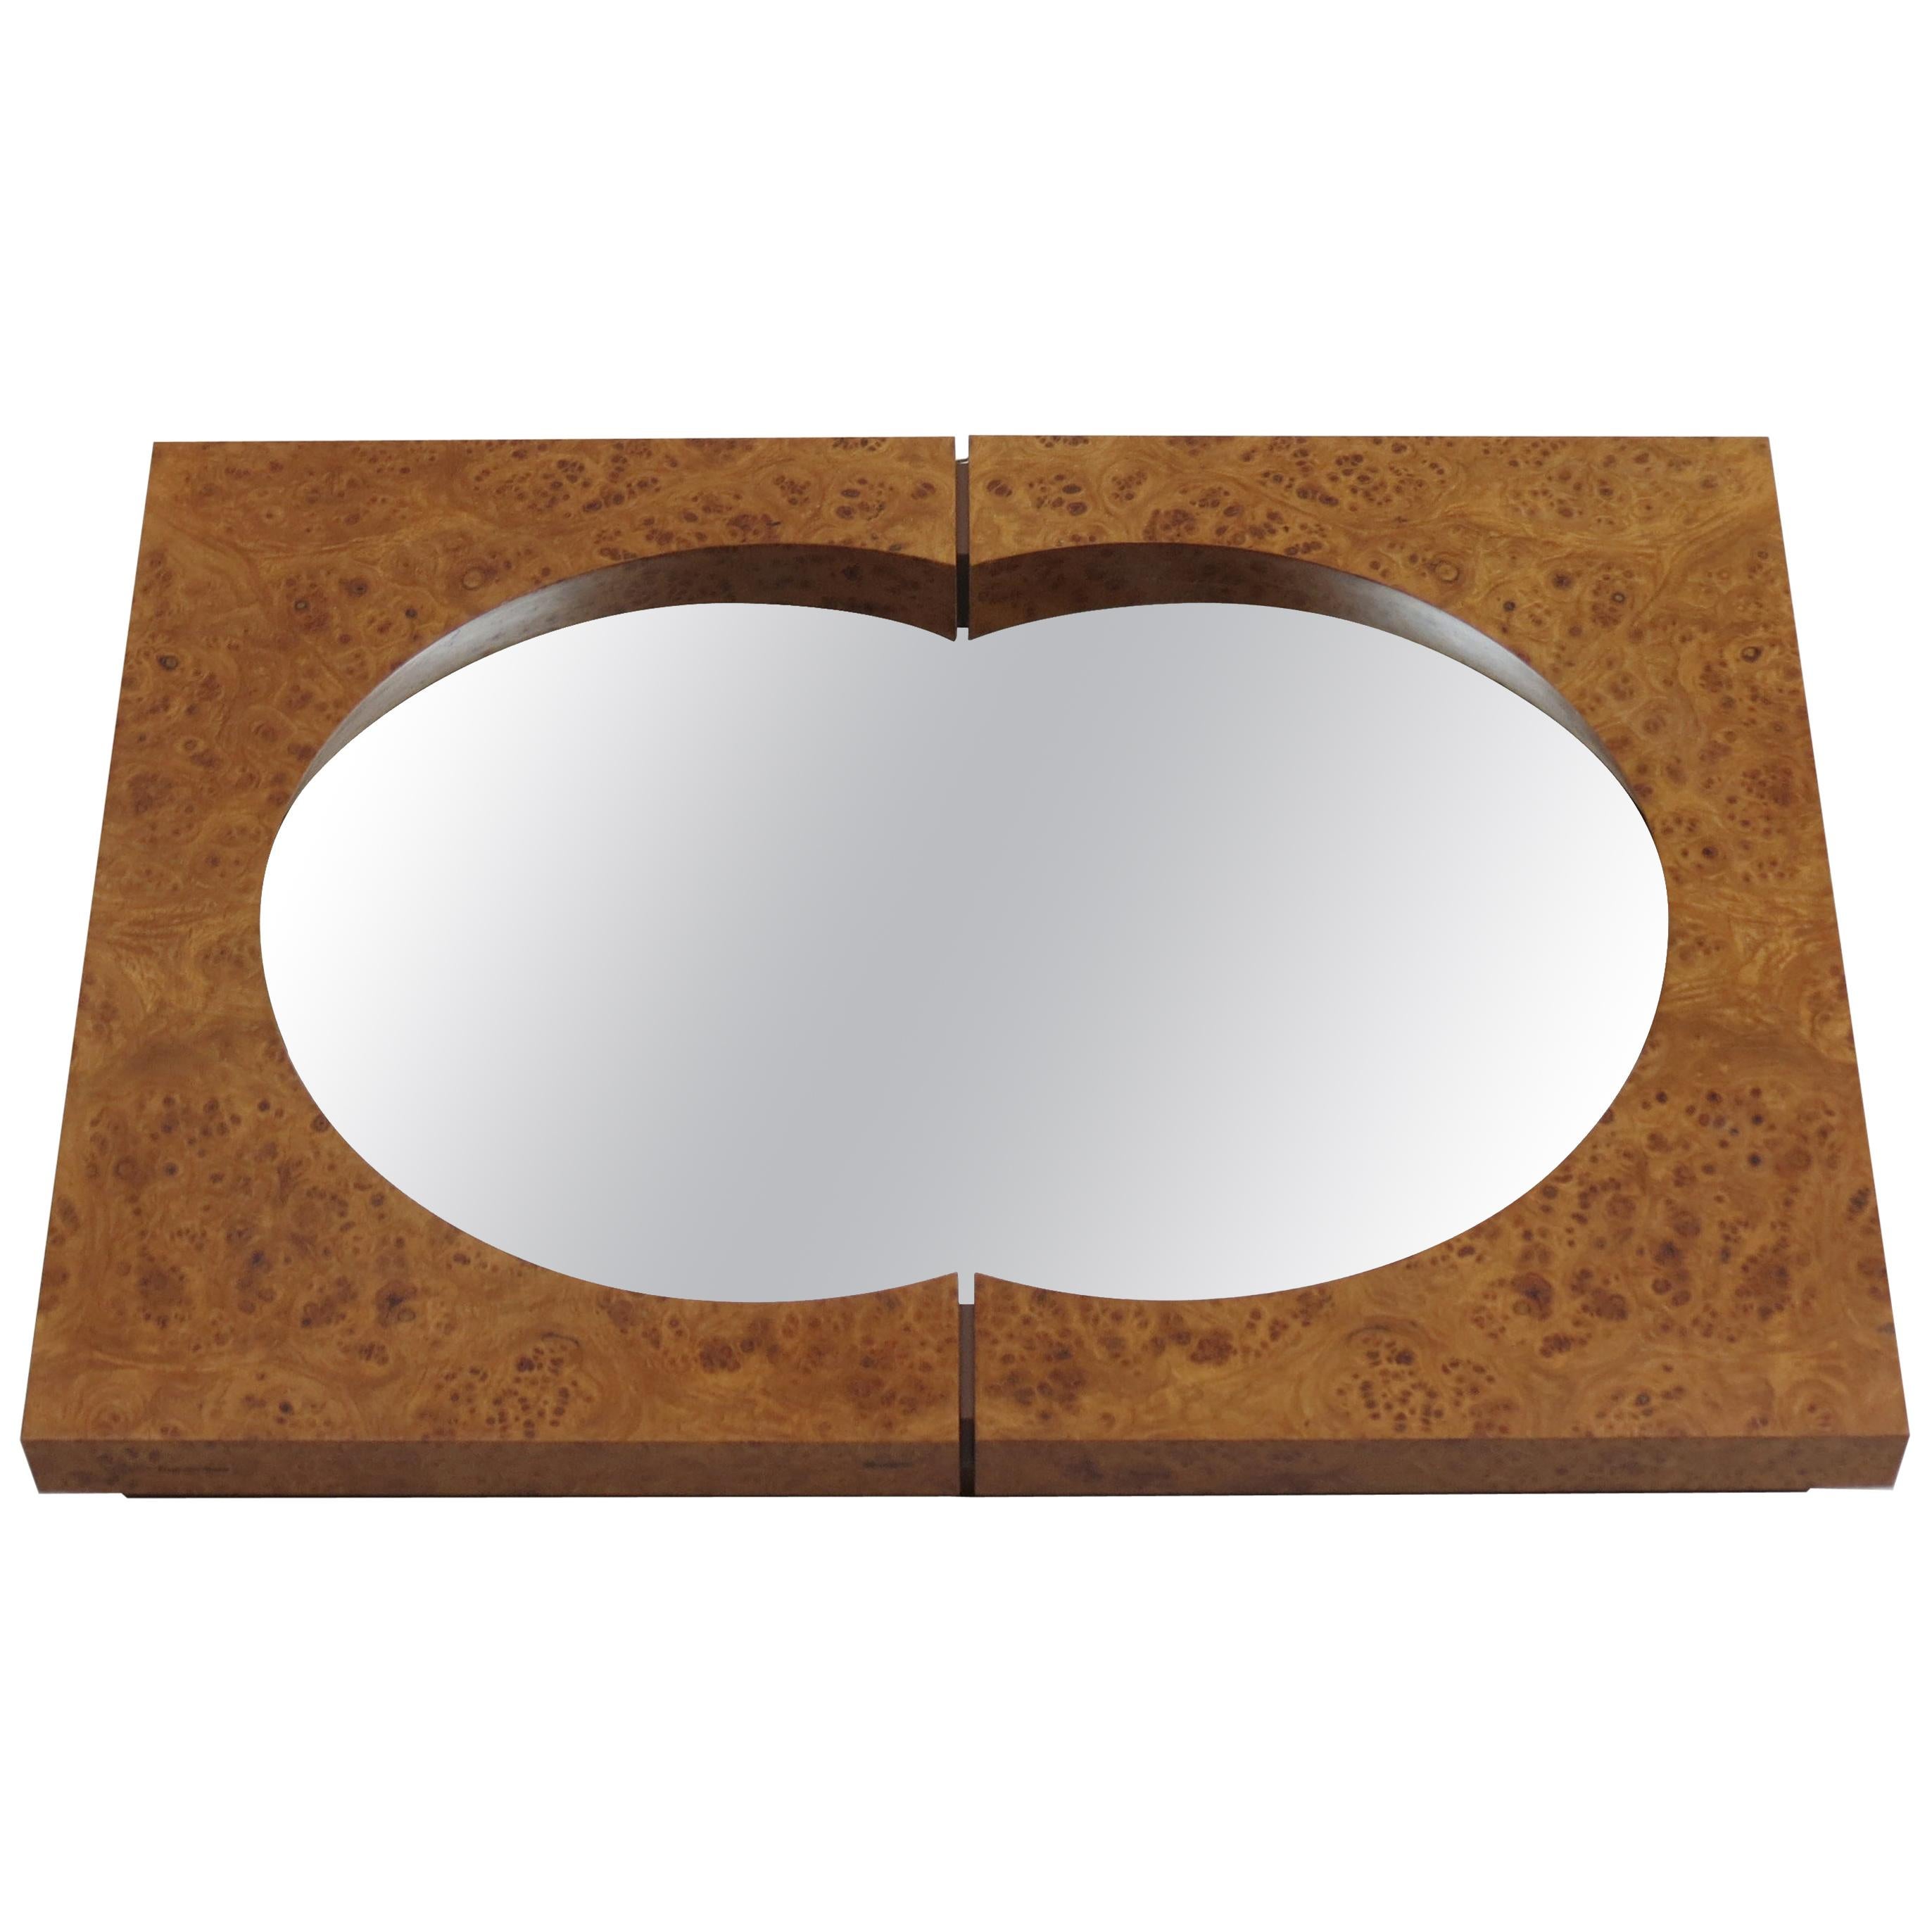 Wonderful wall mirror made from veneered burr elm, designed and hand produced by Desmond Ryan in the 1990s. Exceptional quality, very well made. Glass mirror plate.

In good condition. Stamped Desmond Ryan.



 